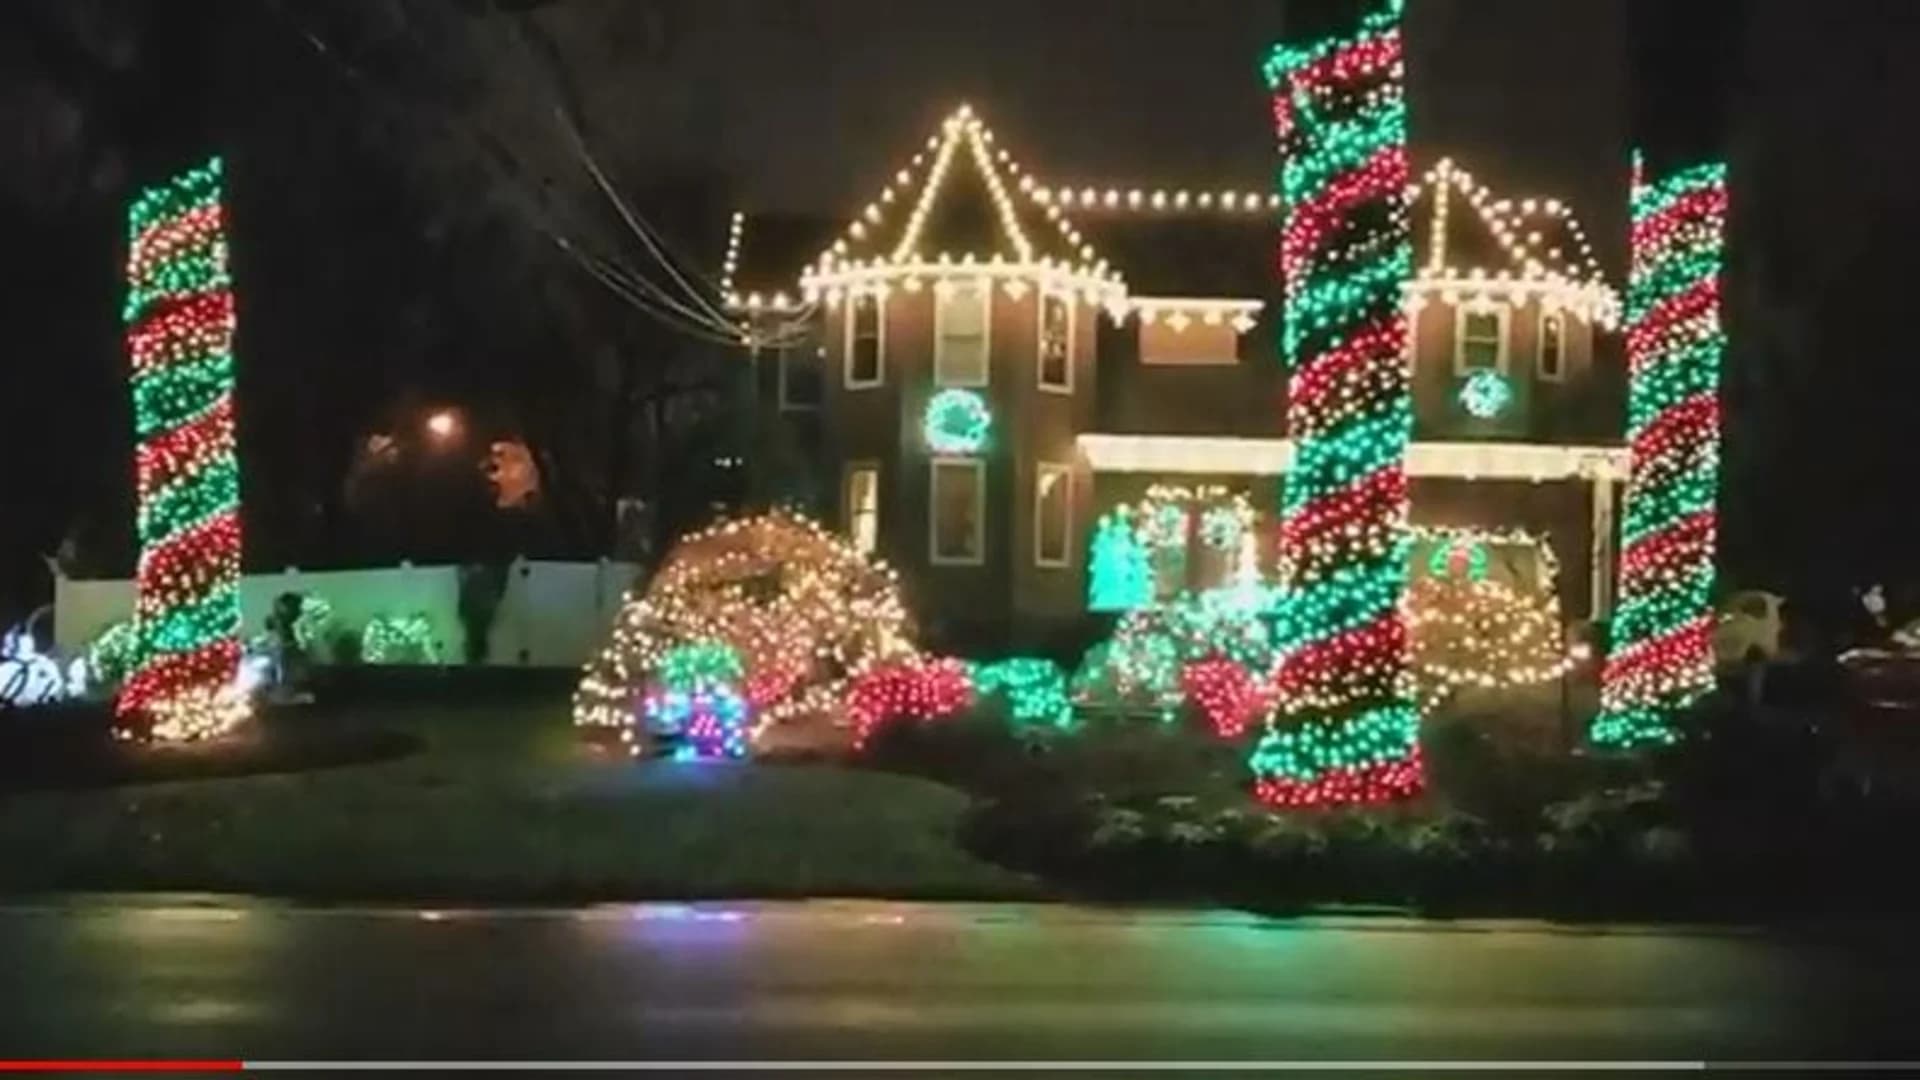 Your 2018 New Jersey Holiday Lights Photos